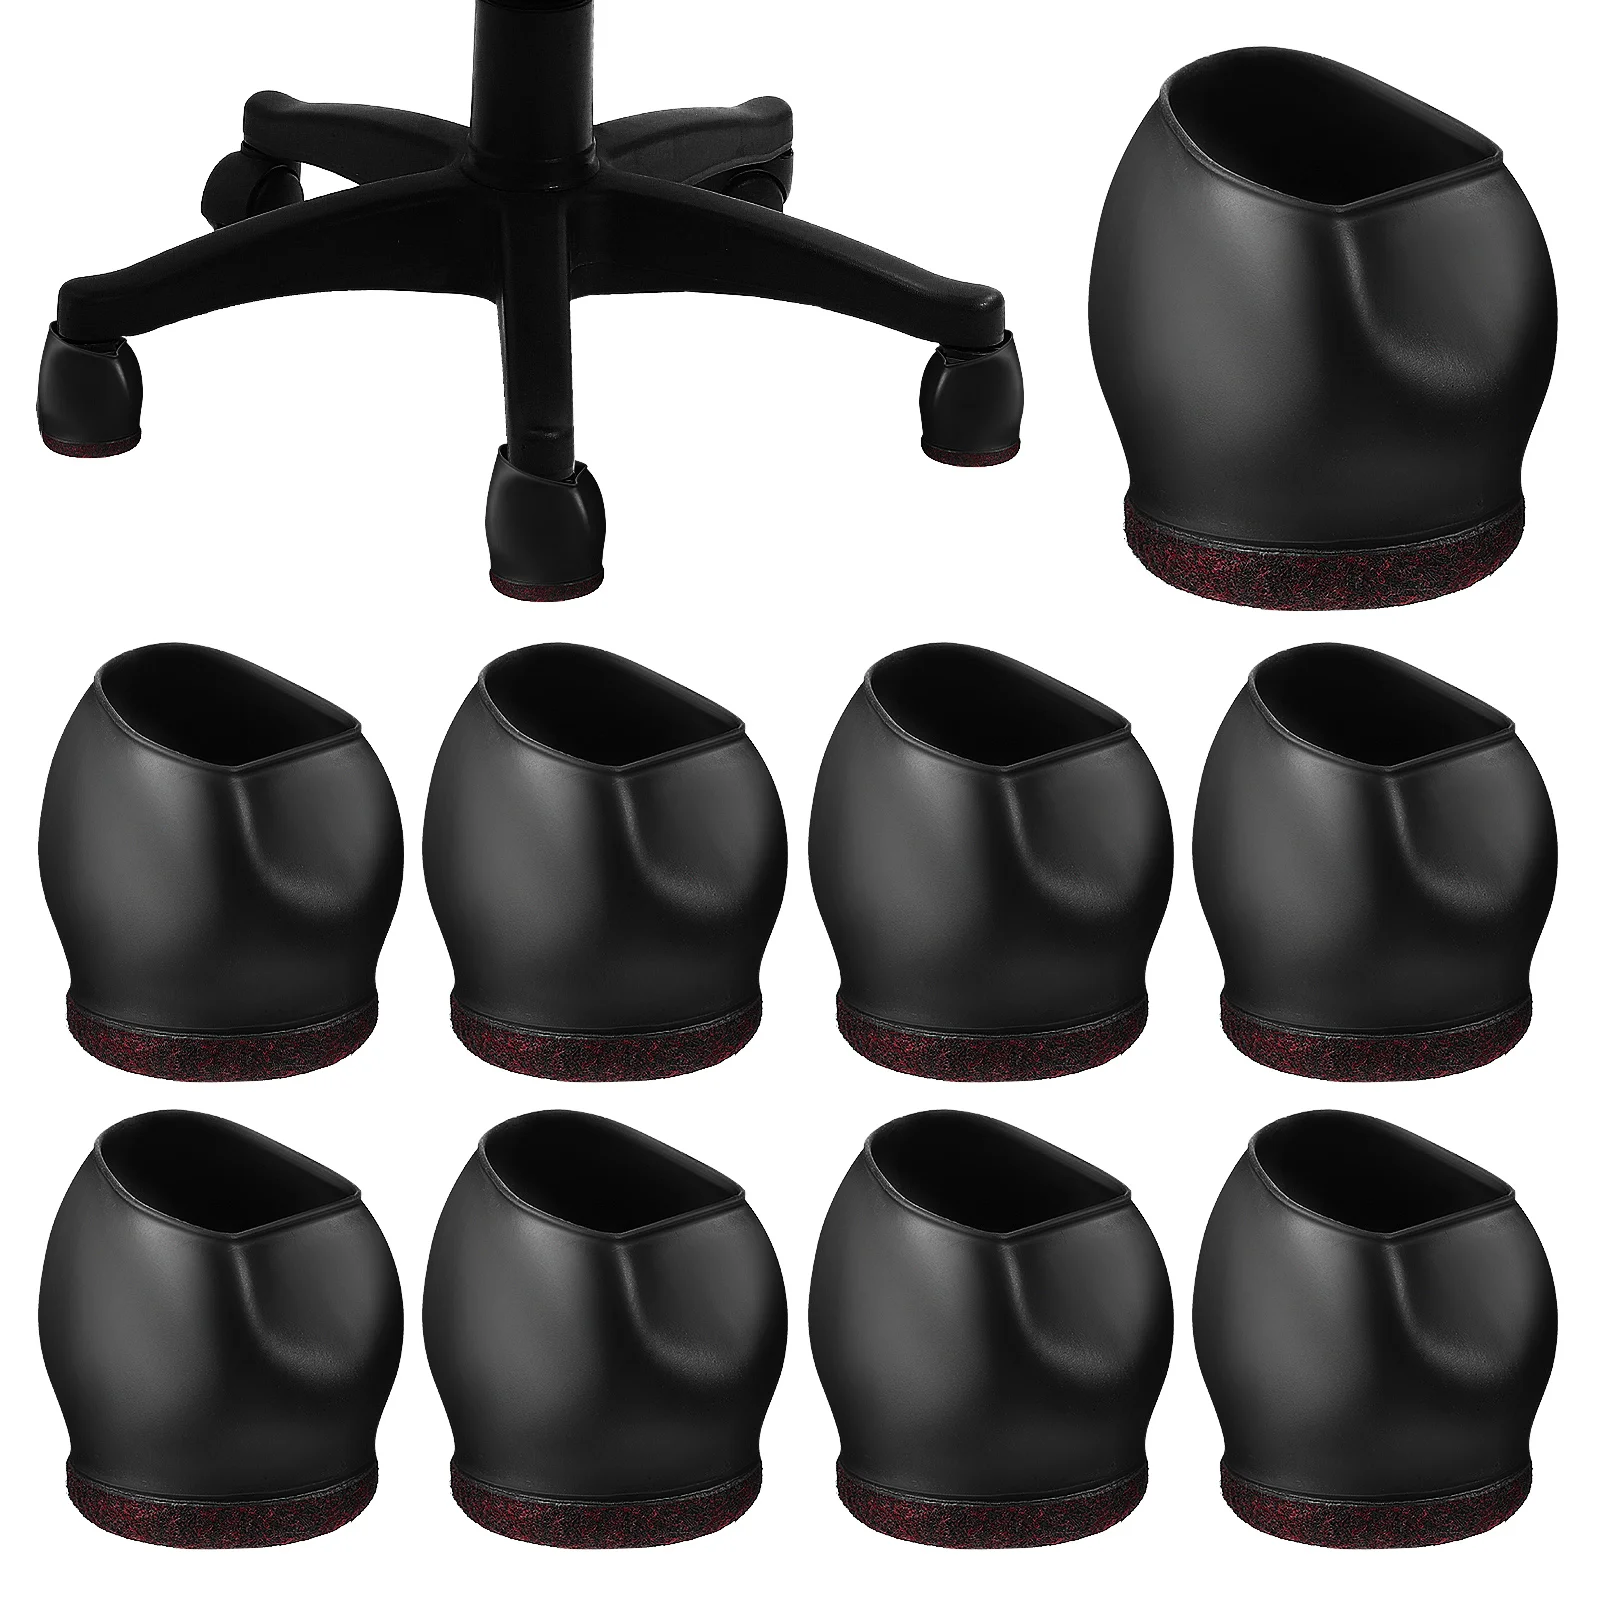 

10 Pcs Chair Leg Floor Protectors Office Wheel Stopper Tables Chairs Caster Cups Rolling Dining Room Covers Tpe Stoppers